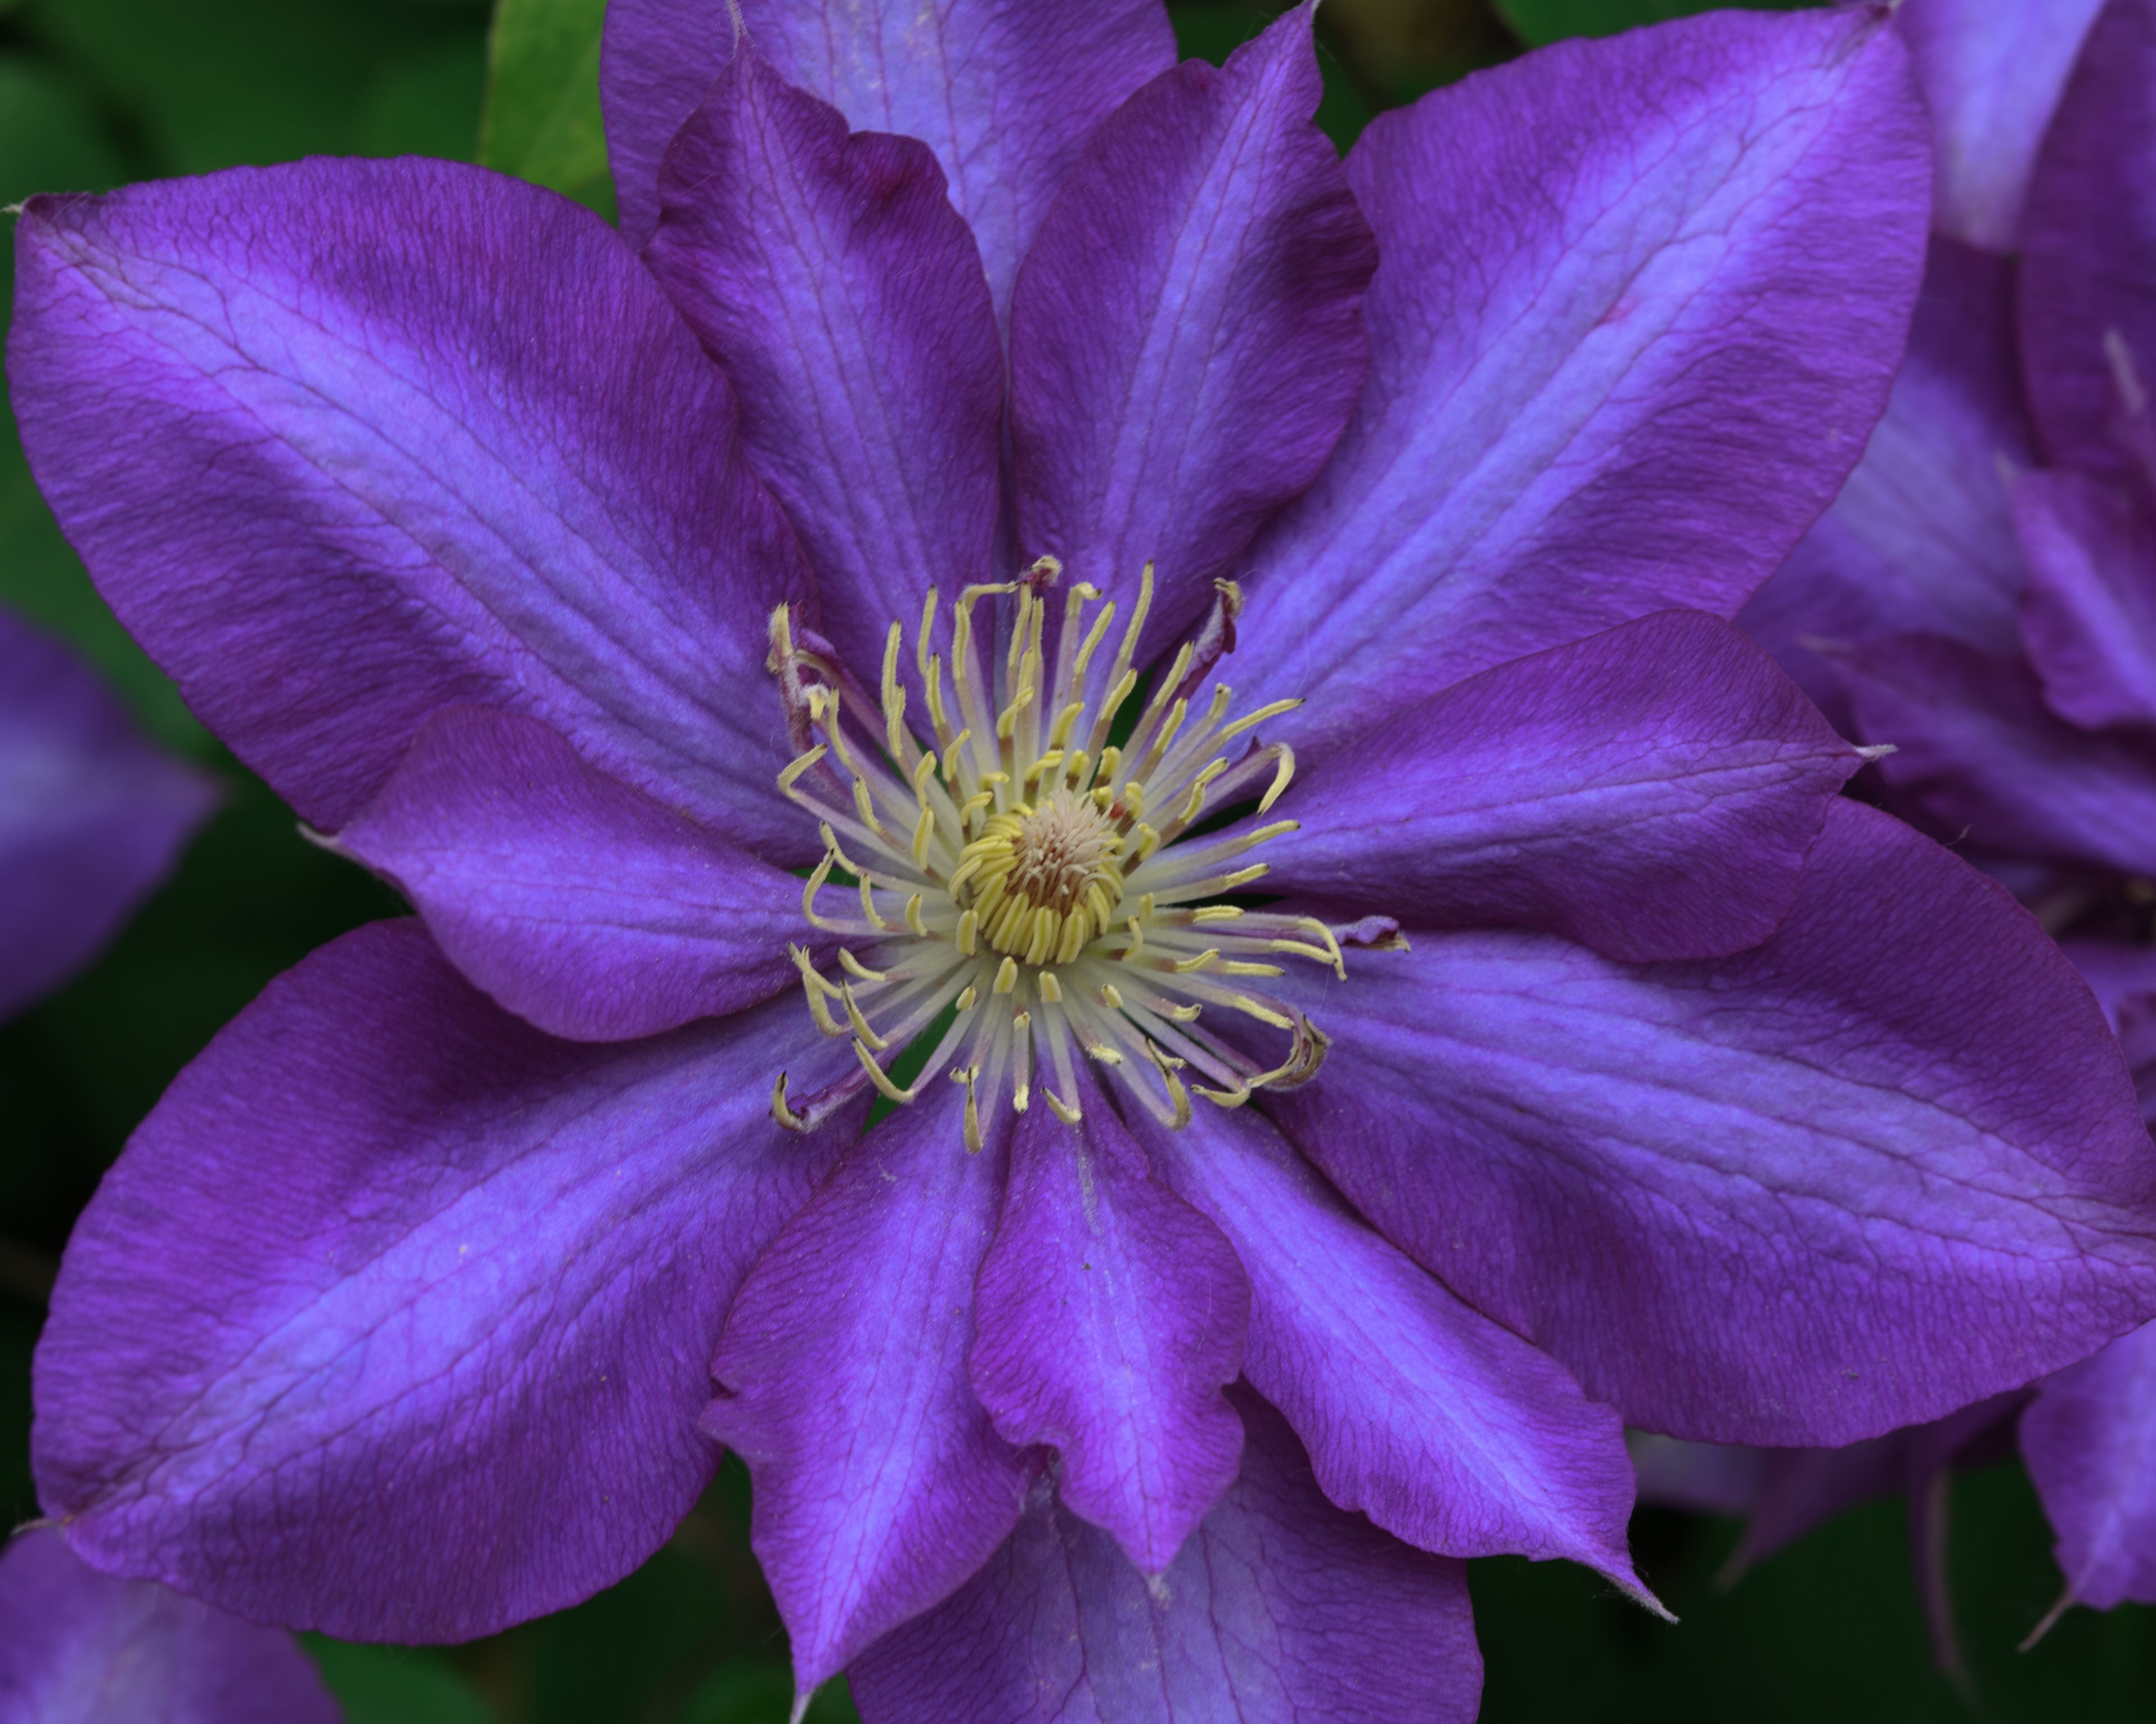 File:Purple Clematis.jpg - Wikimedia Commons